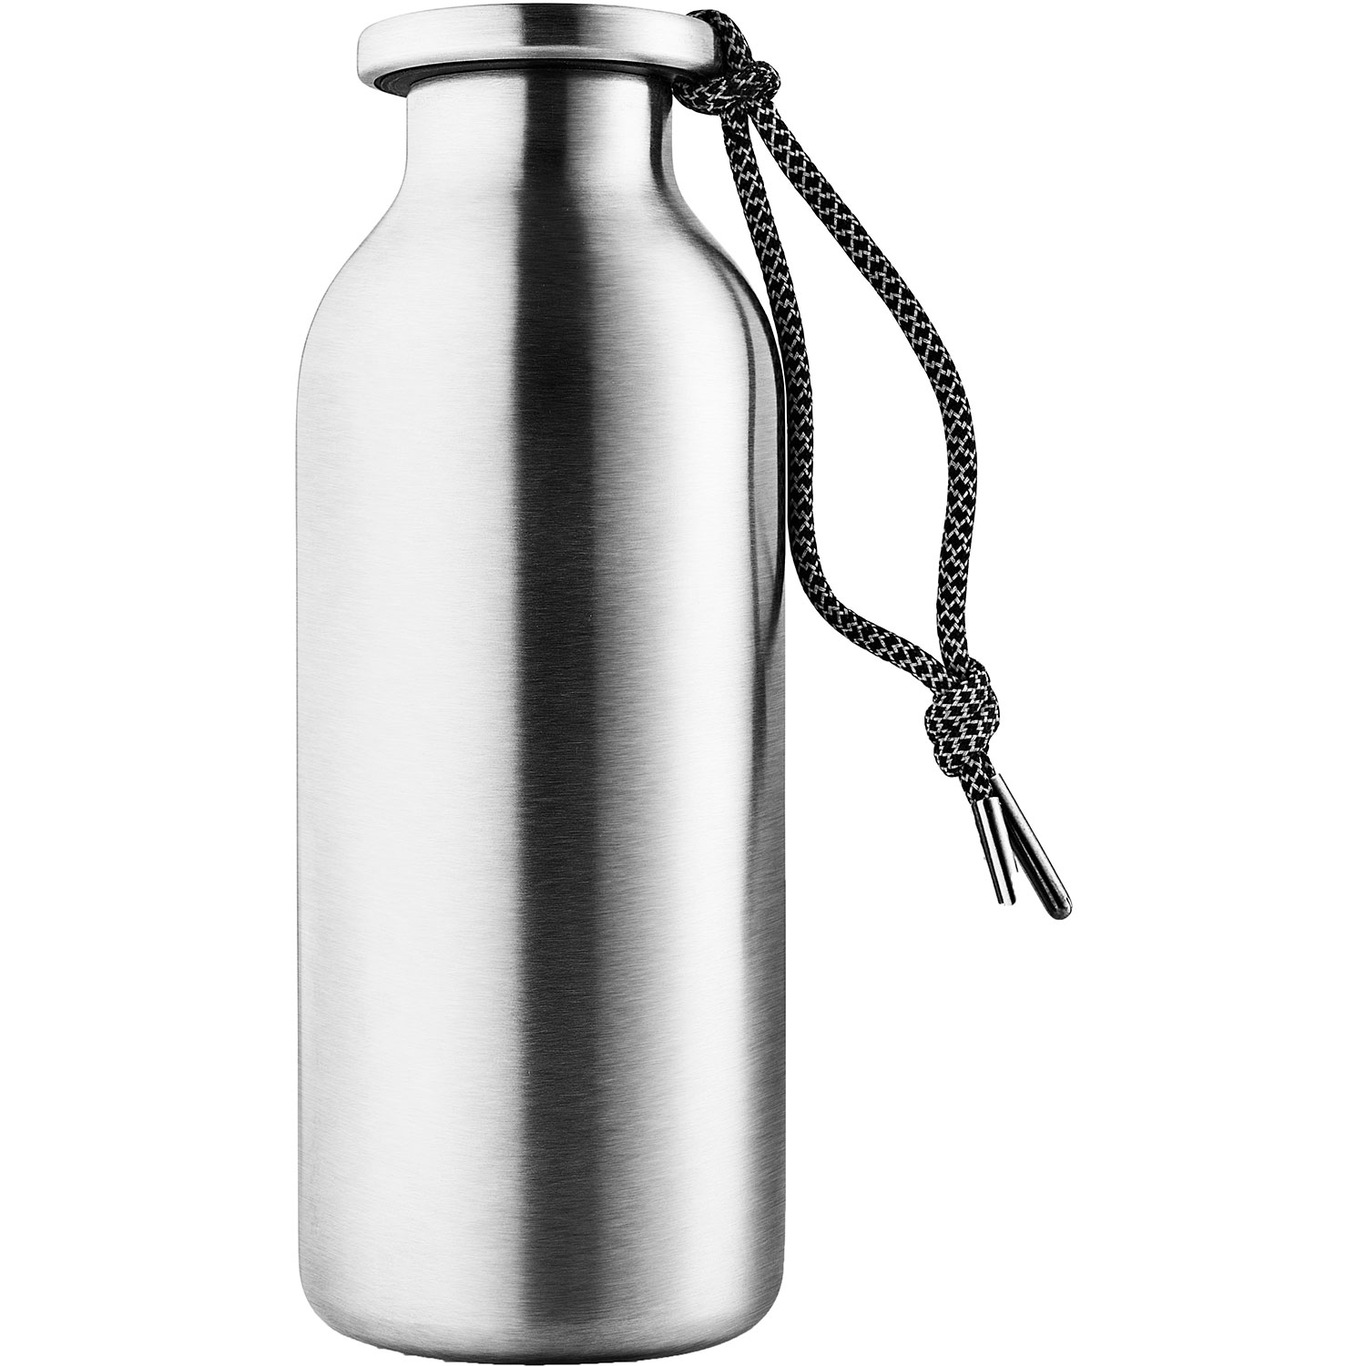 24/12 Thermos Bottle, Stainless Steel